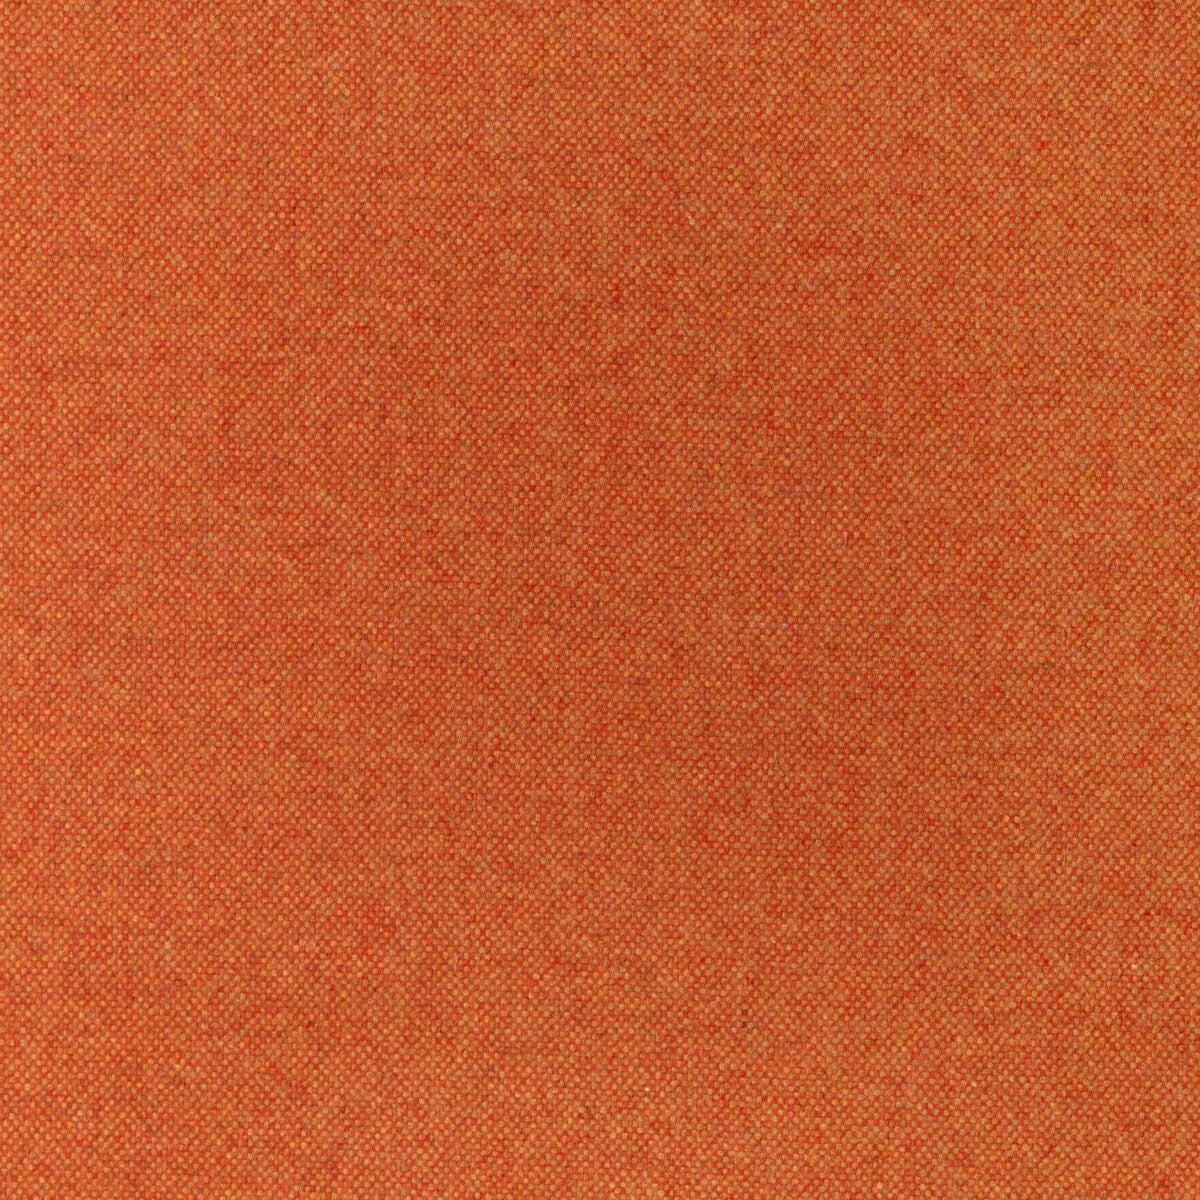 Manchester Wool fabric in squash color - pattern 37026.194.0 - by Kravet Contract